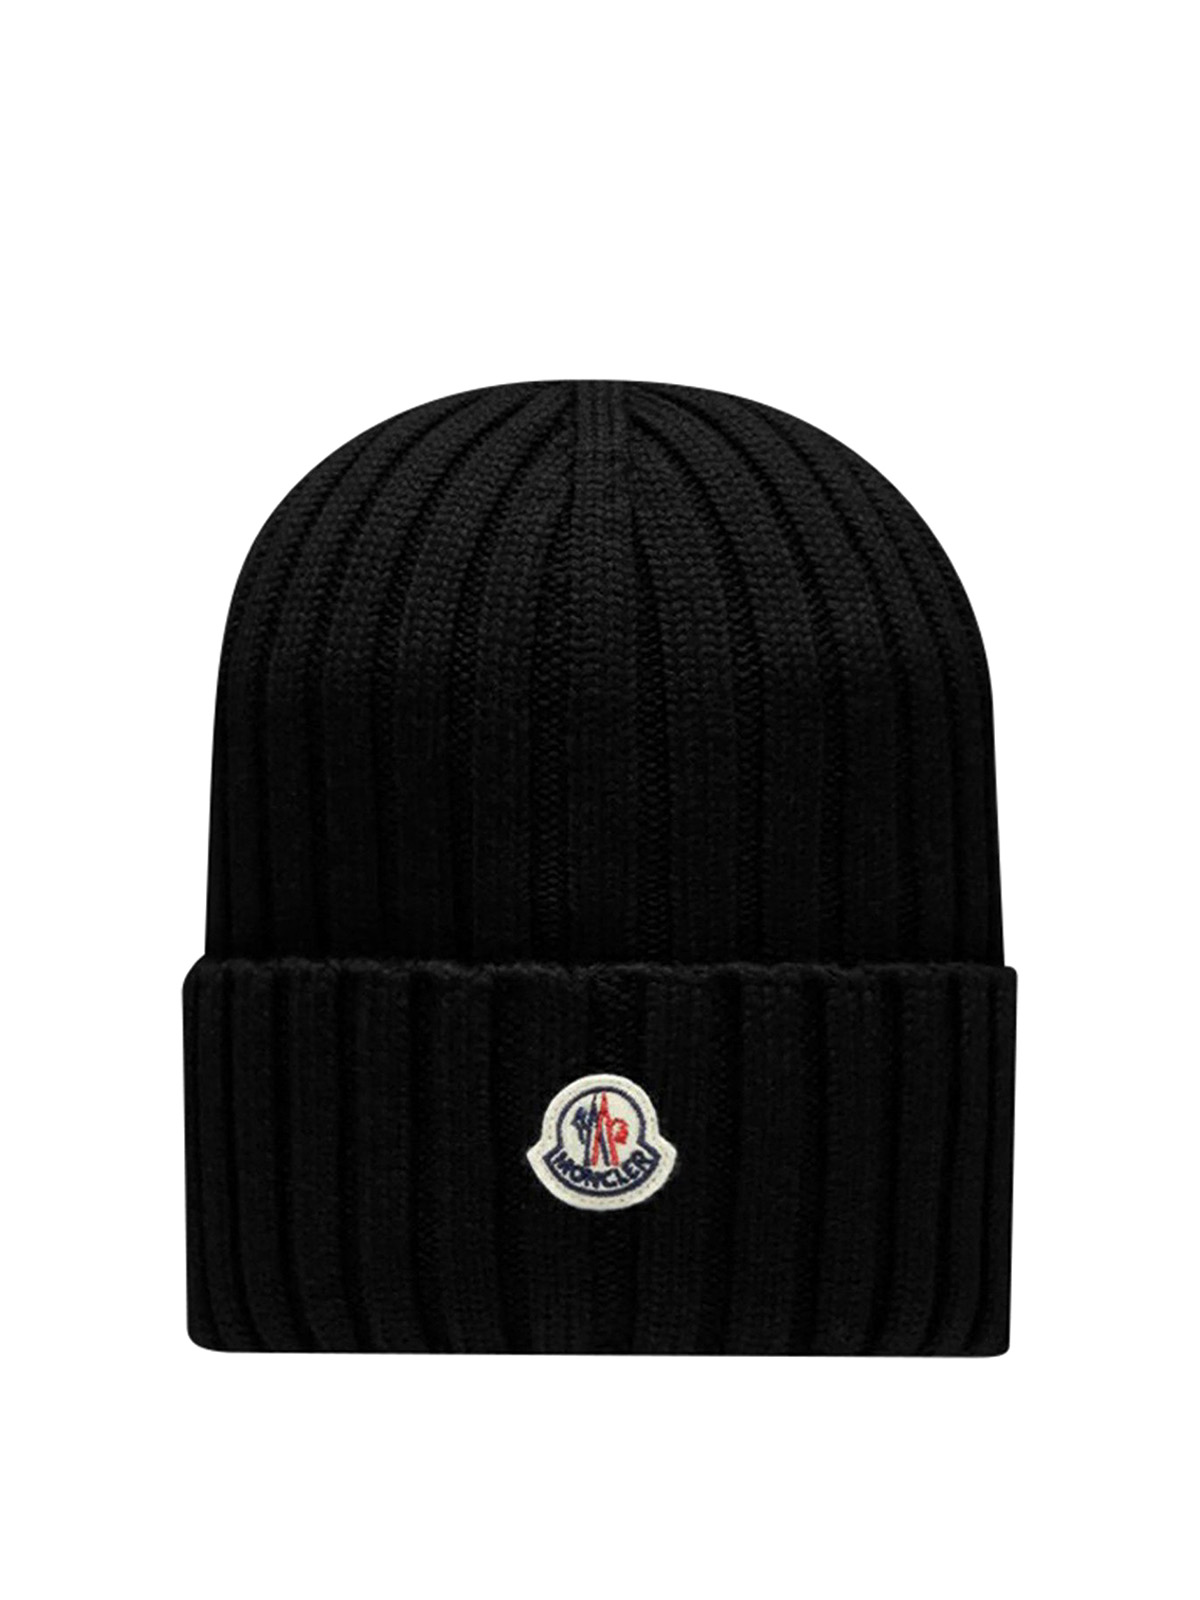 Beanies Moncler - Logo - 3B00037A9327999 | Shop online at THEBS [iKRIX]